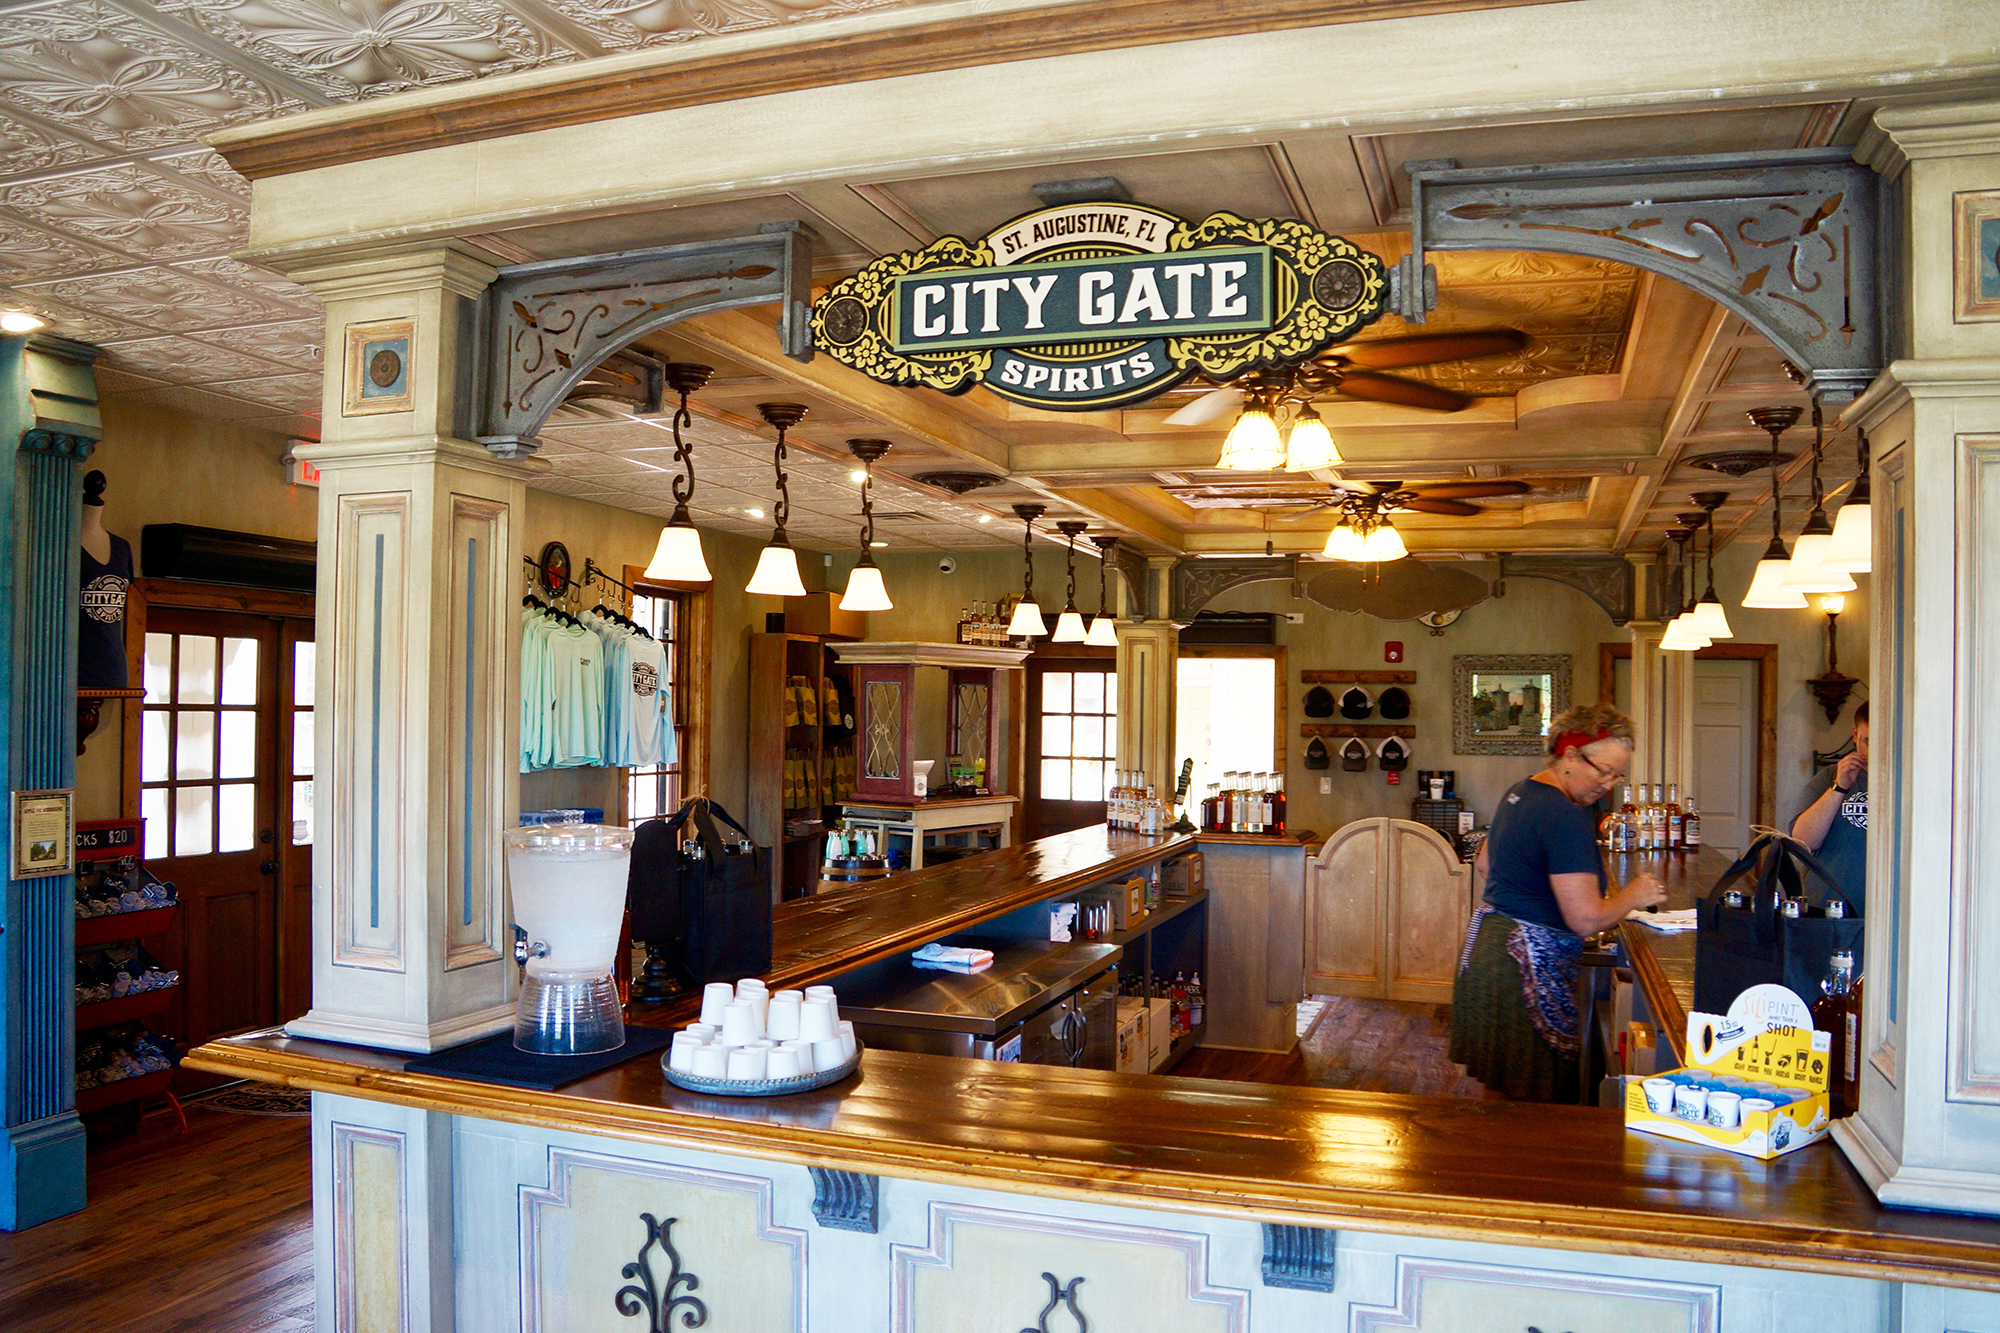 City Gate Spirits opened in October at 11 St. George St. It offers bottles of spirits starting at $25.